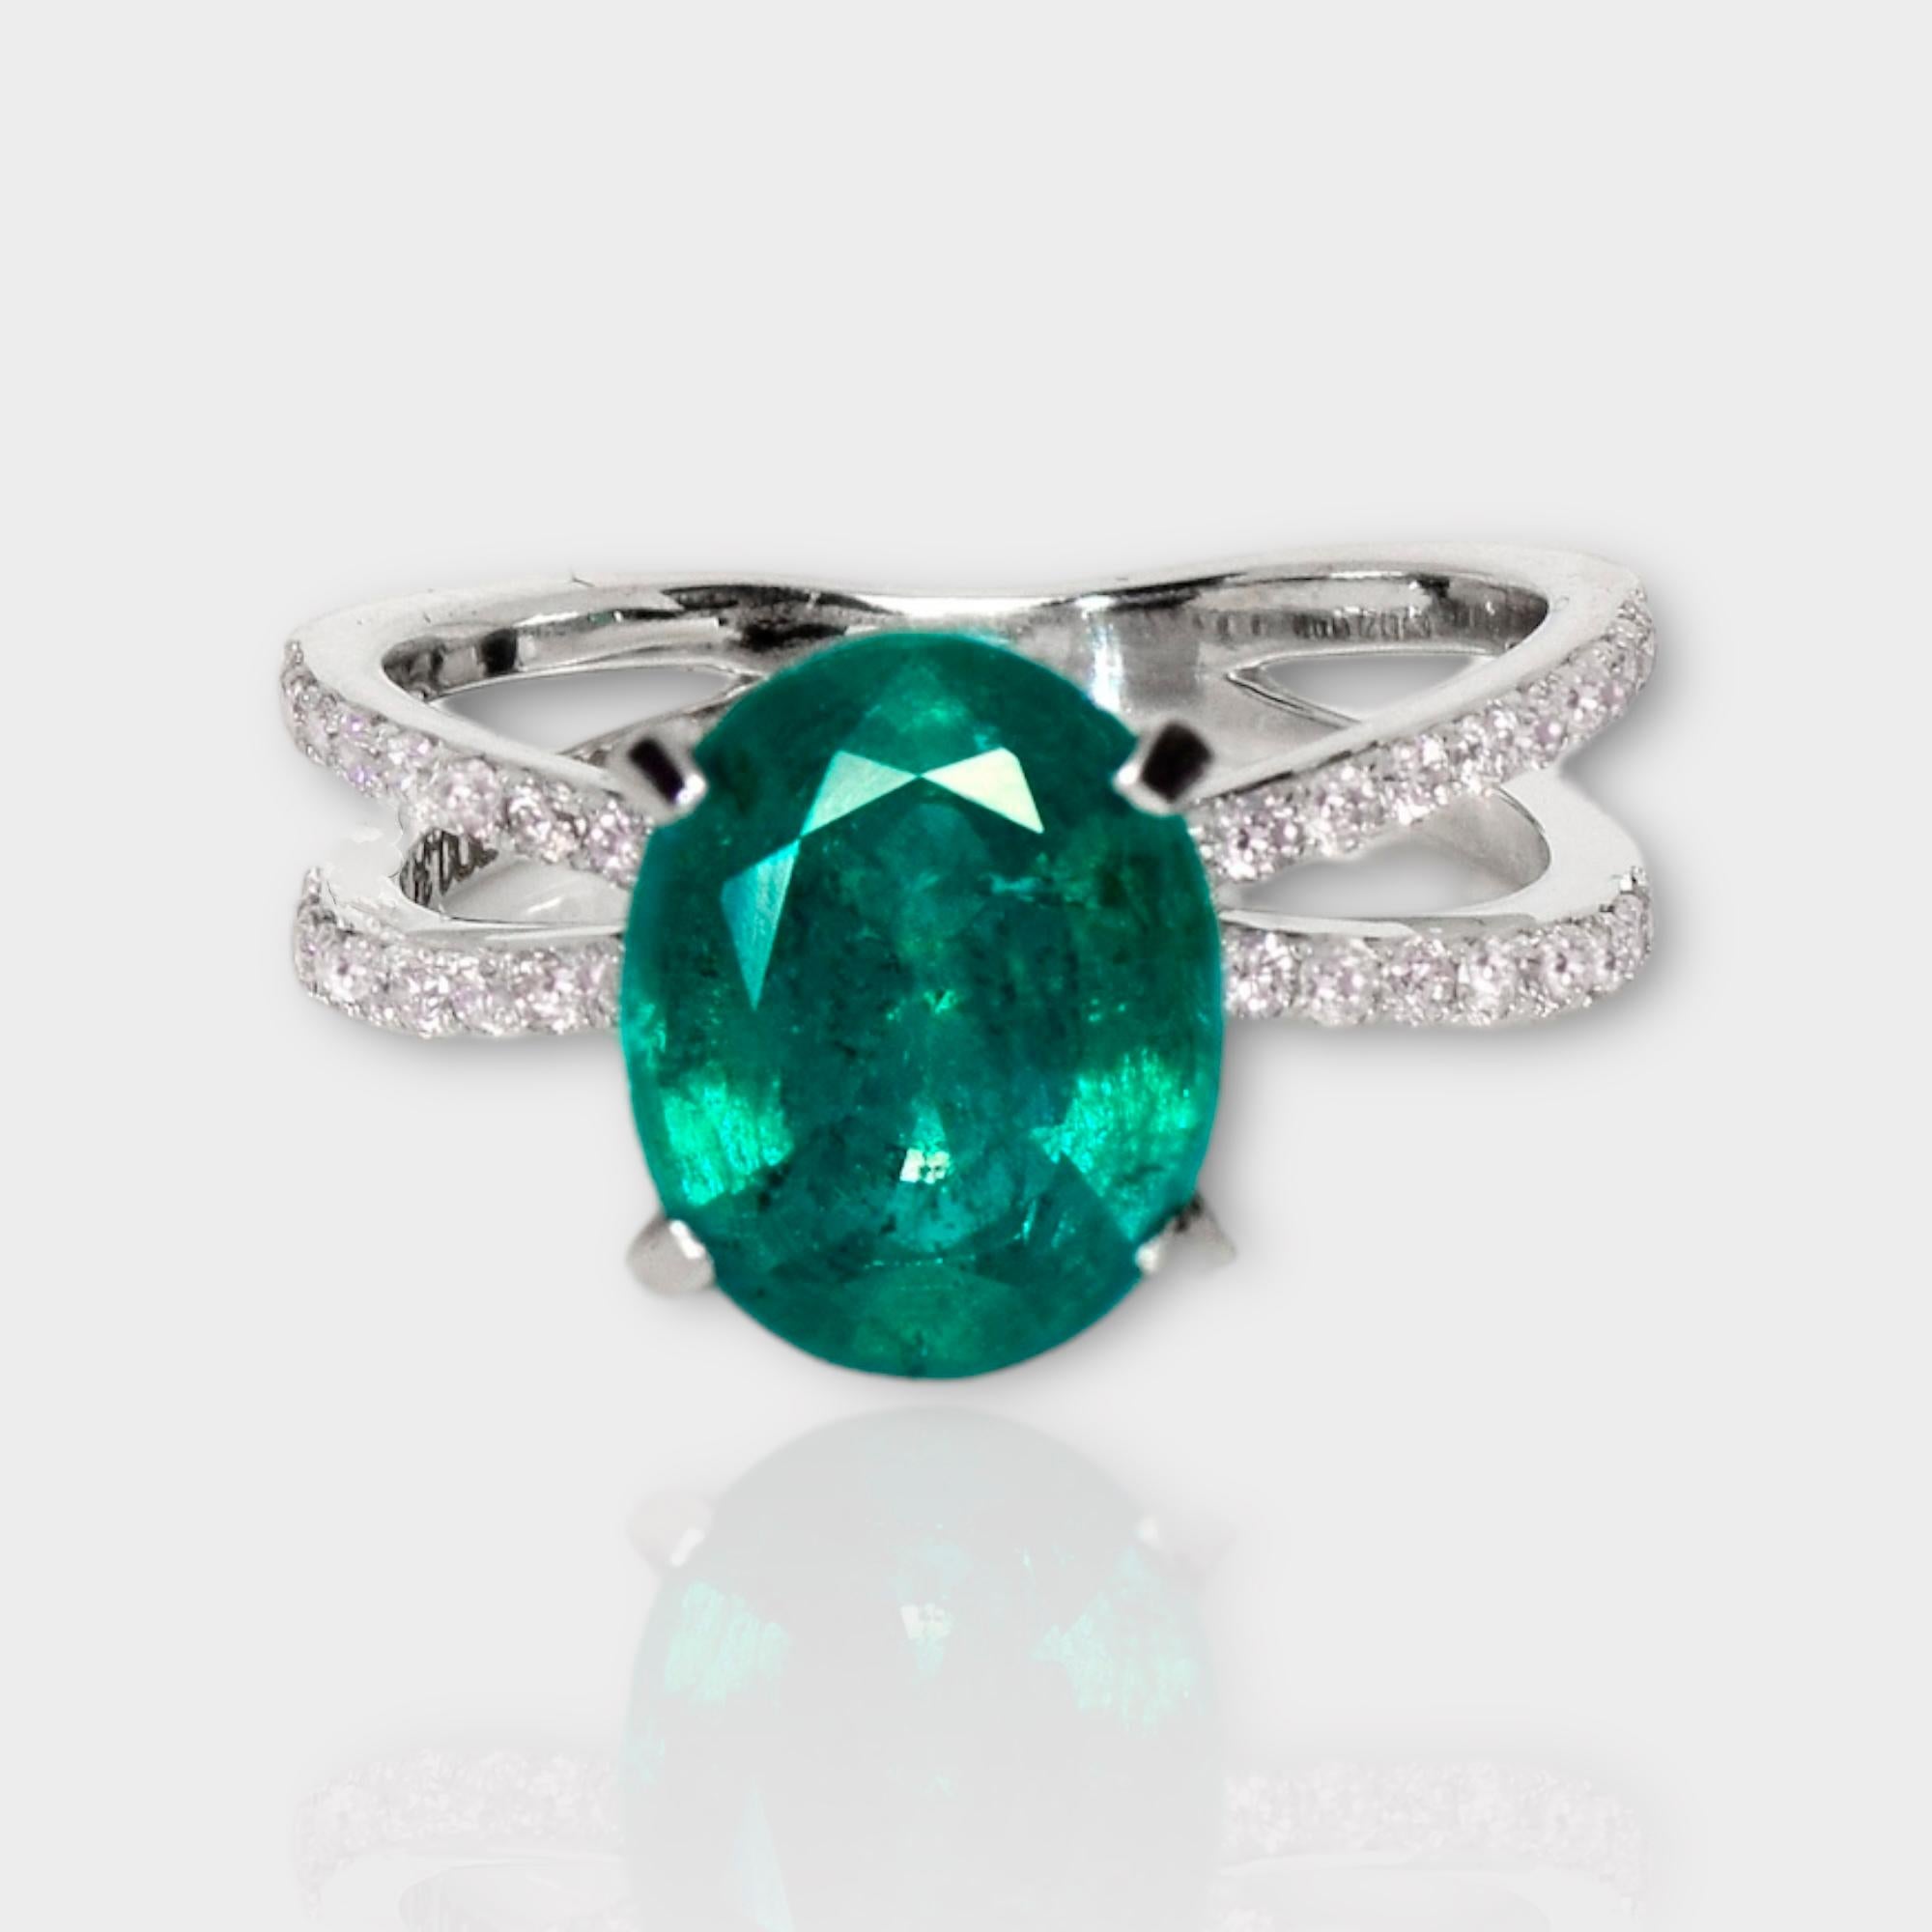 *IGI 14K White Gold 3.23 ct Emerald&Pink Diamonds Antique Art Deco Style Engagement Ring*

A natural Zambia green emerald weighing 3.23 ct is set on a 14K white gold arc deco design band with natural pink diamonds weighing 0.34 ct.

The good-quality